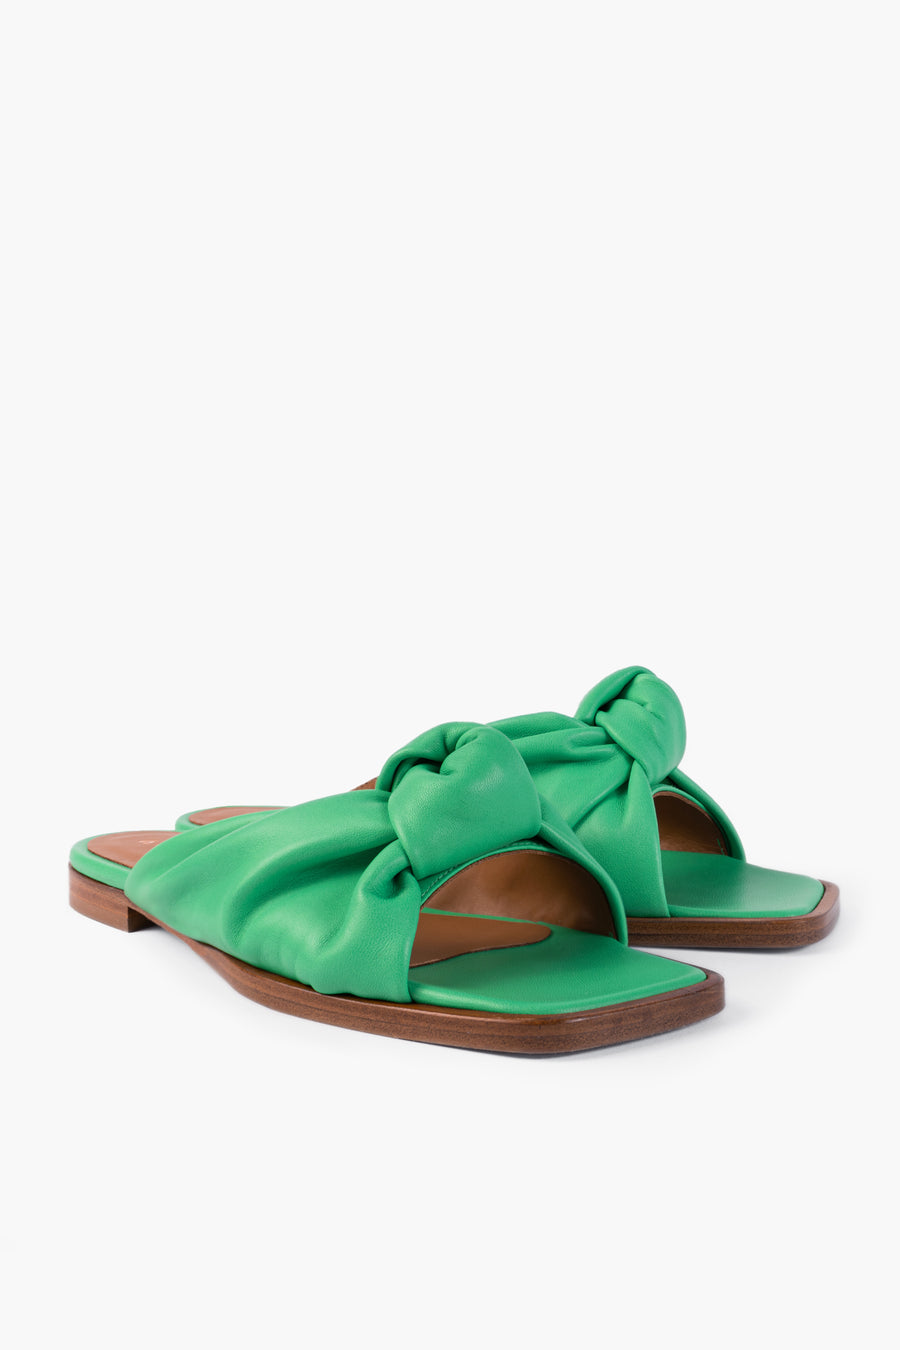  Sustainable, green coloured Tilly sandals locally produced in Hamburg. Made from metal-free leather. Made in Germany by Alina Schürfeld.